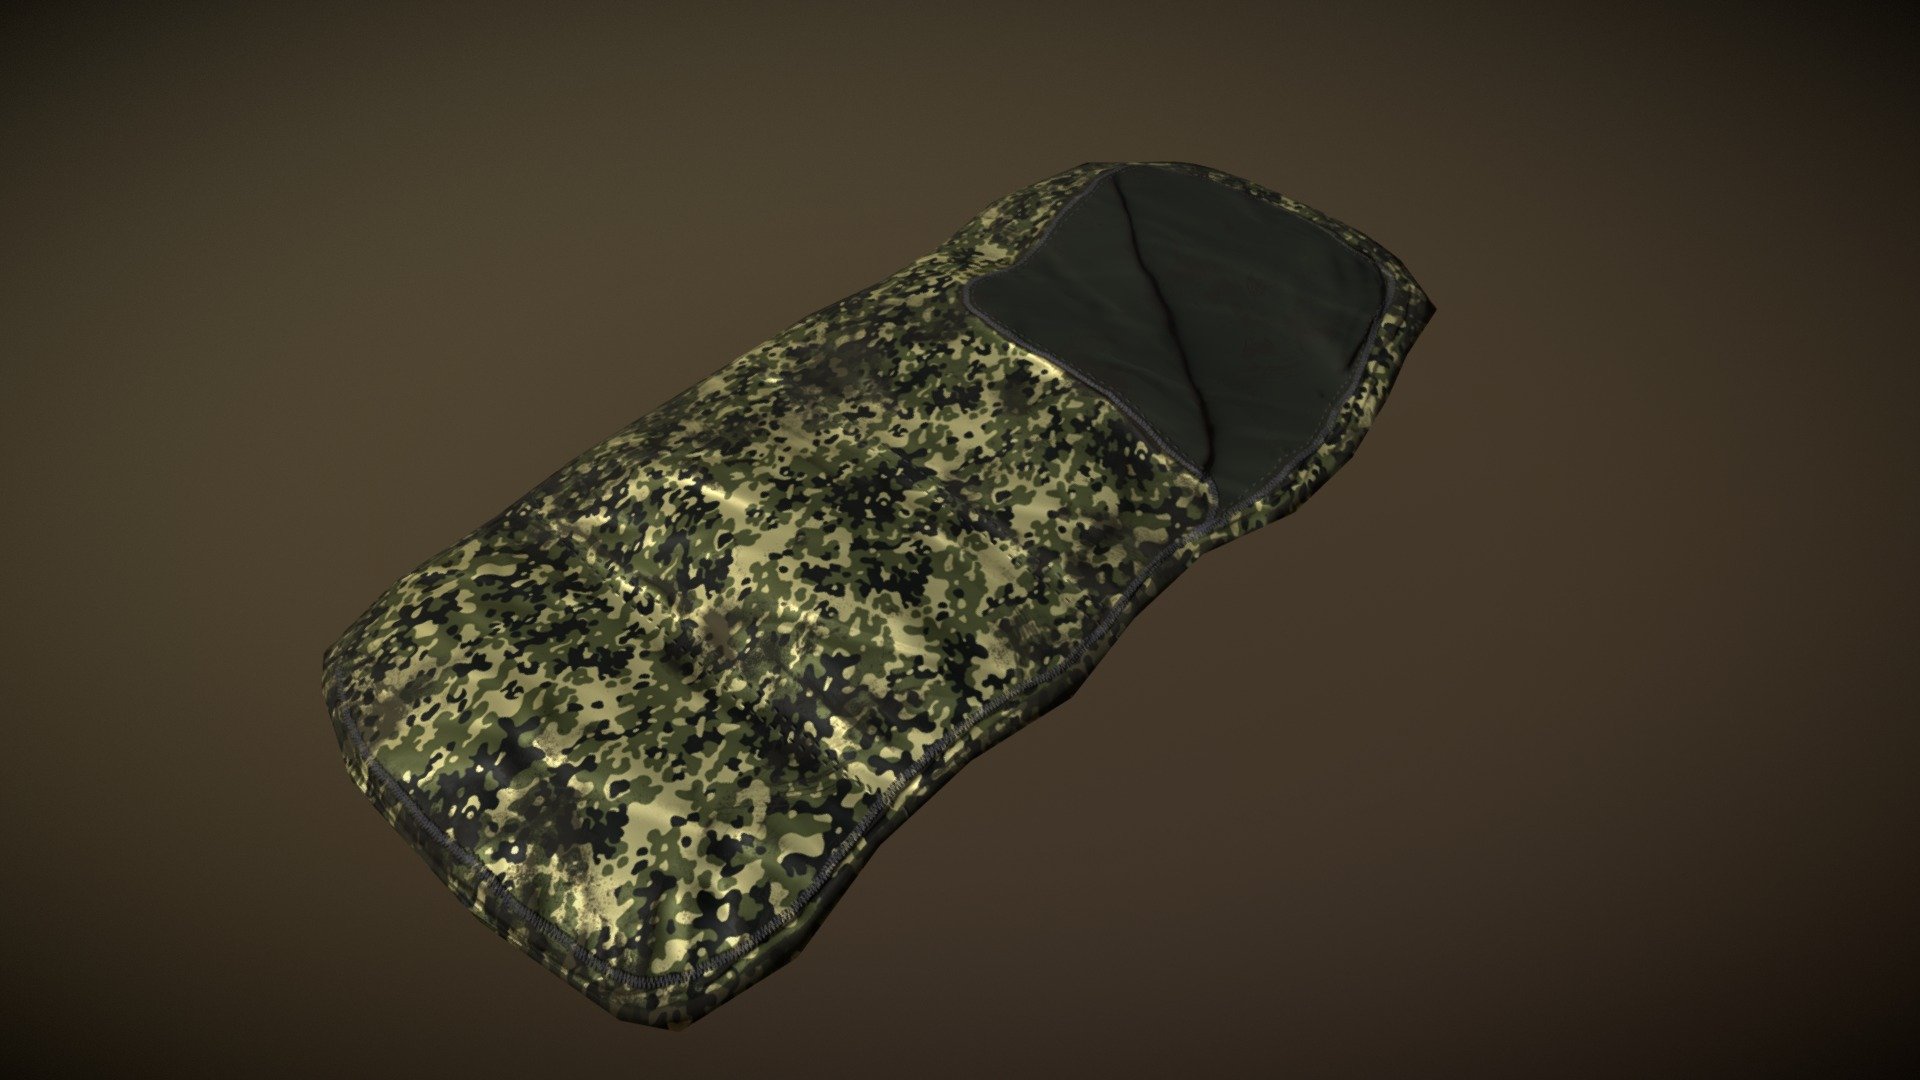 A civilian sleeping bag in military look.

The sleeping bag is low poly and gameready 3d model